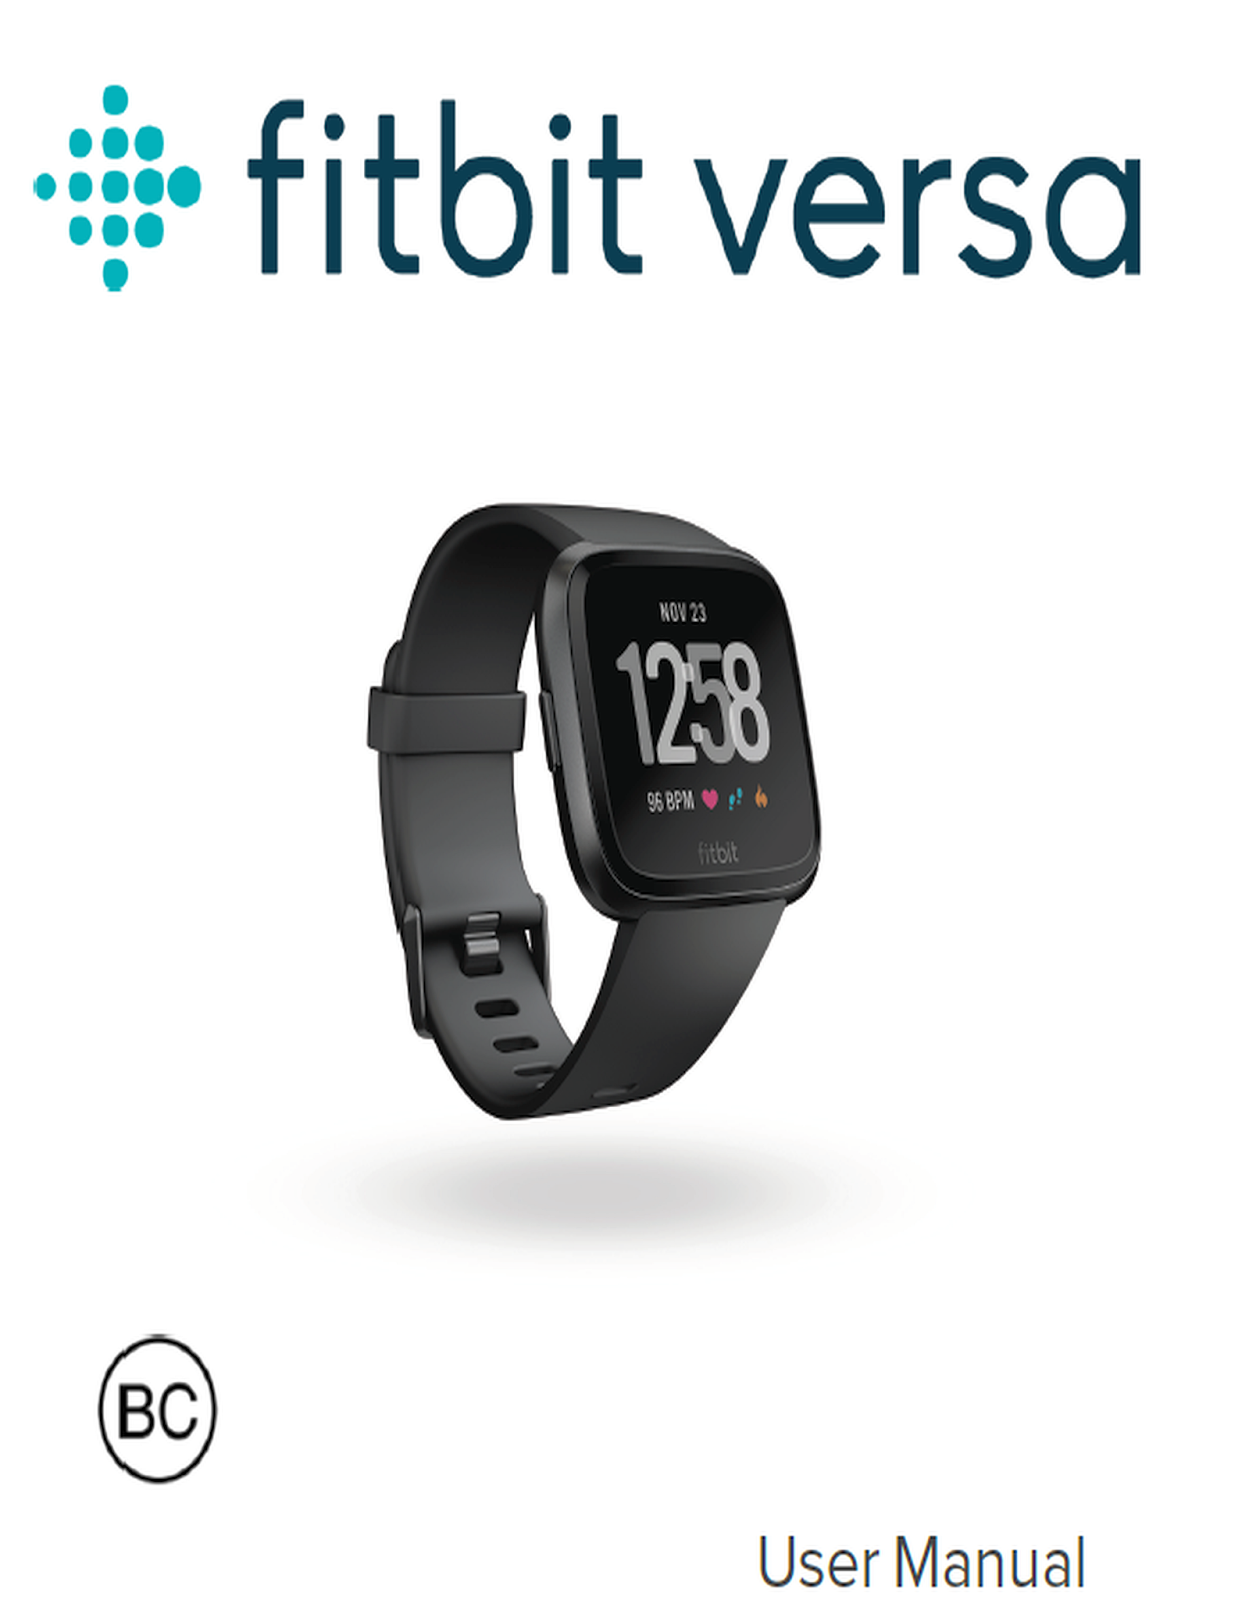 how to set up a versa fitbit